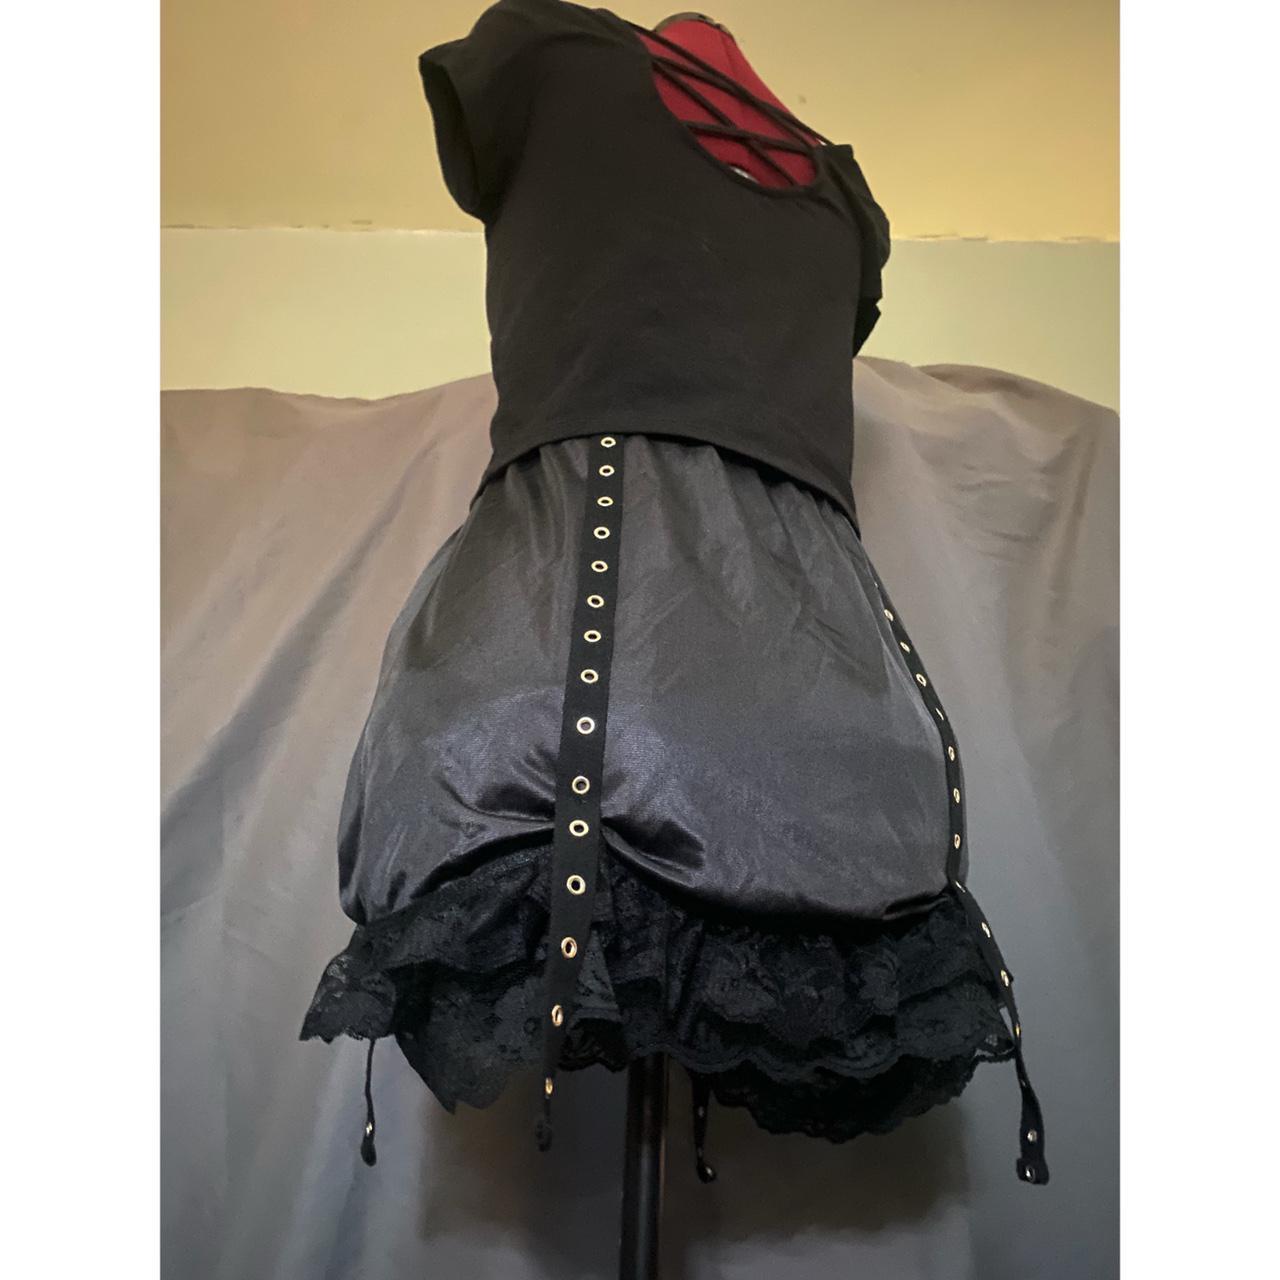 Product Image 4 - Chain Grommet Skirt
Made from an